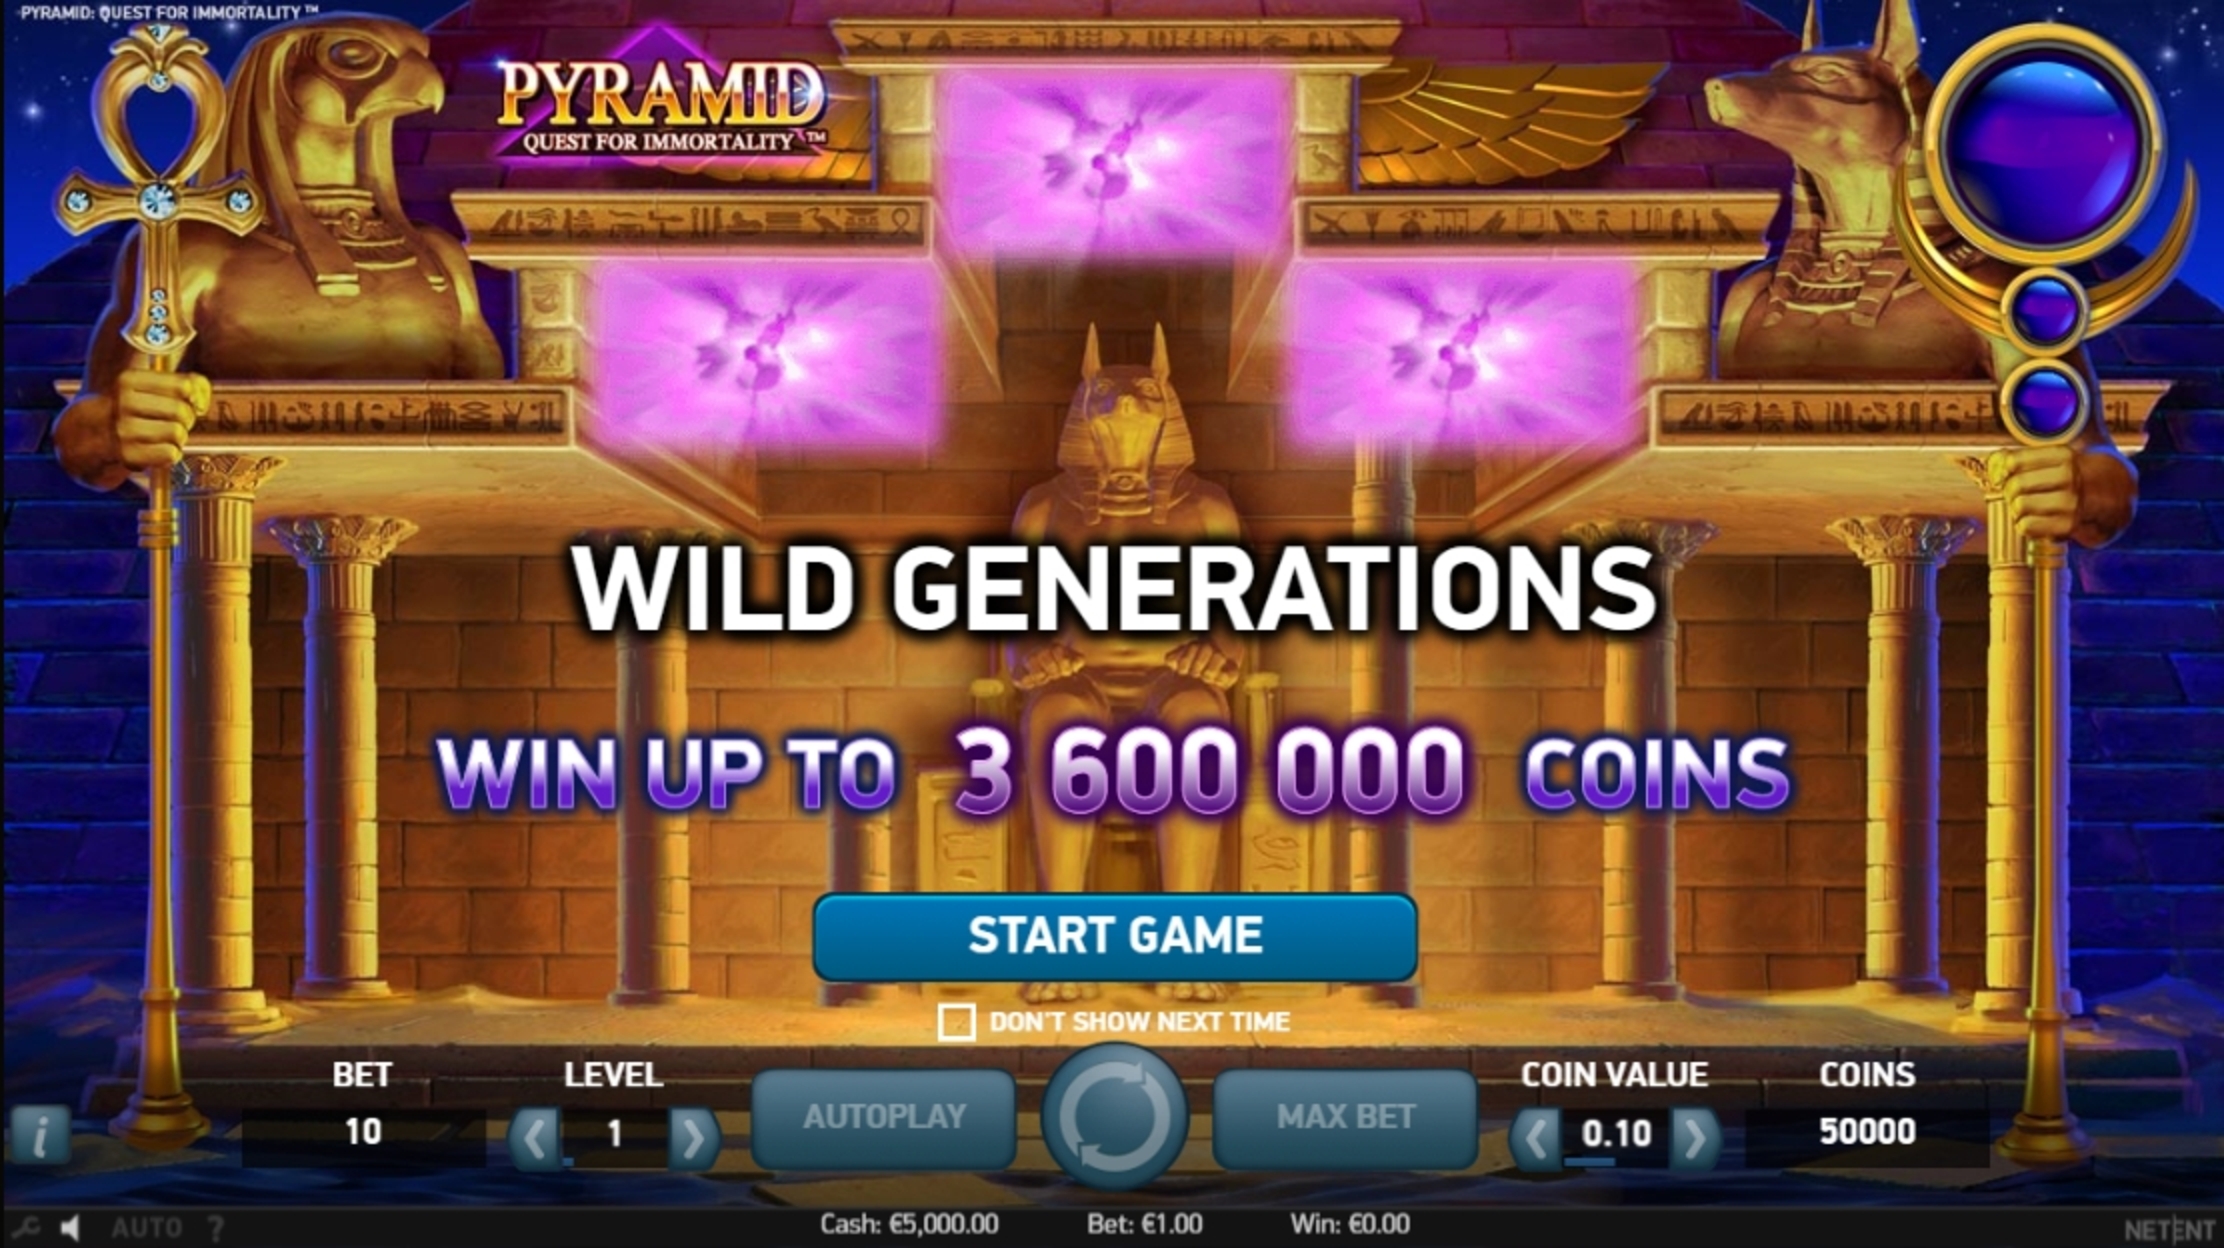 Play Pyramid: Quest for Immortality Free Casino Slot Game by NetEnt